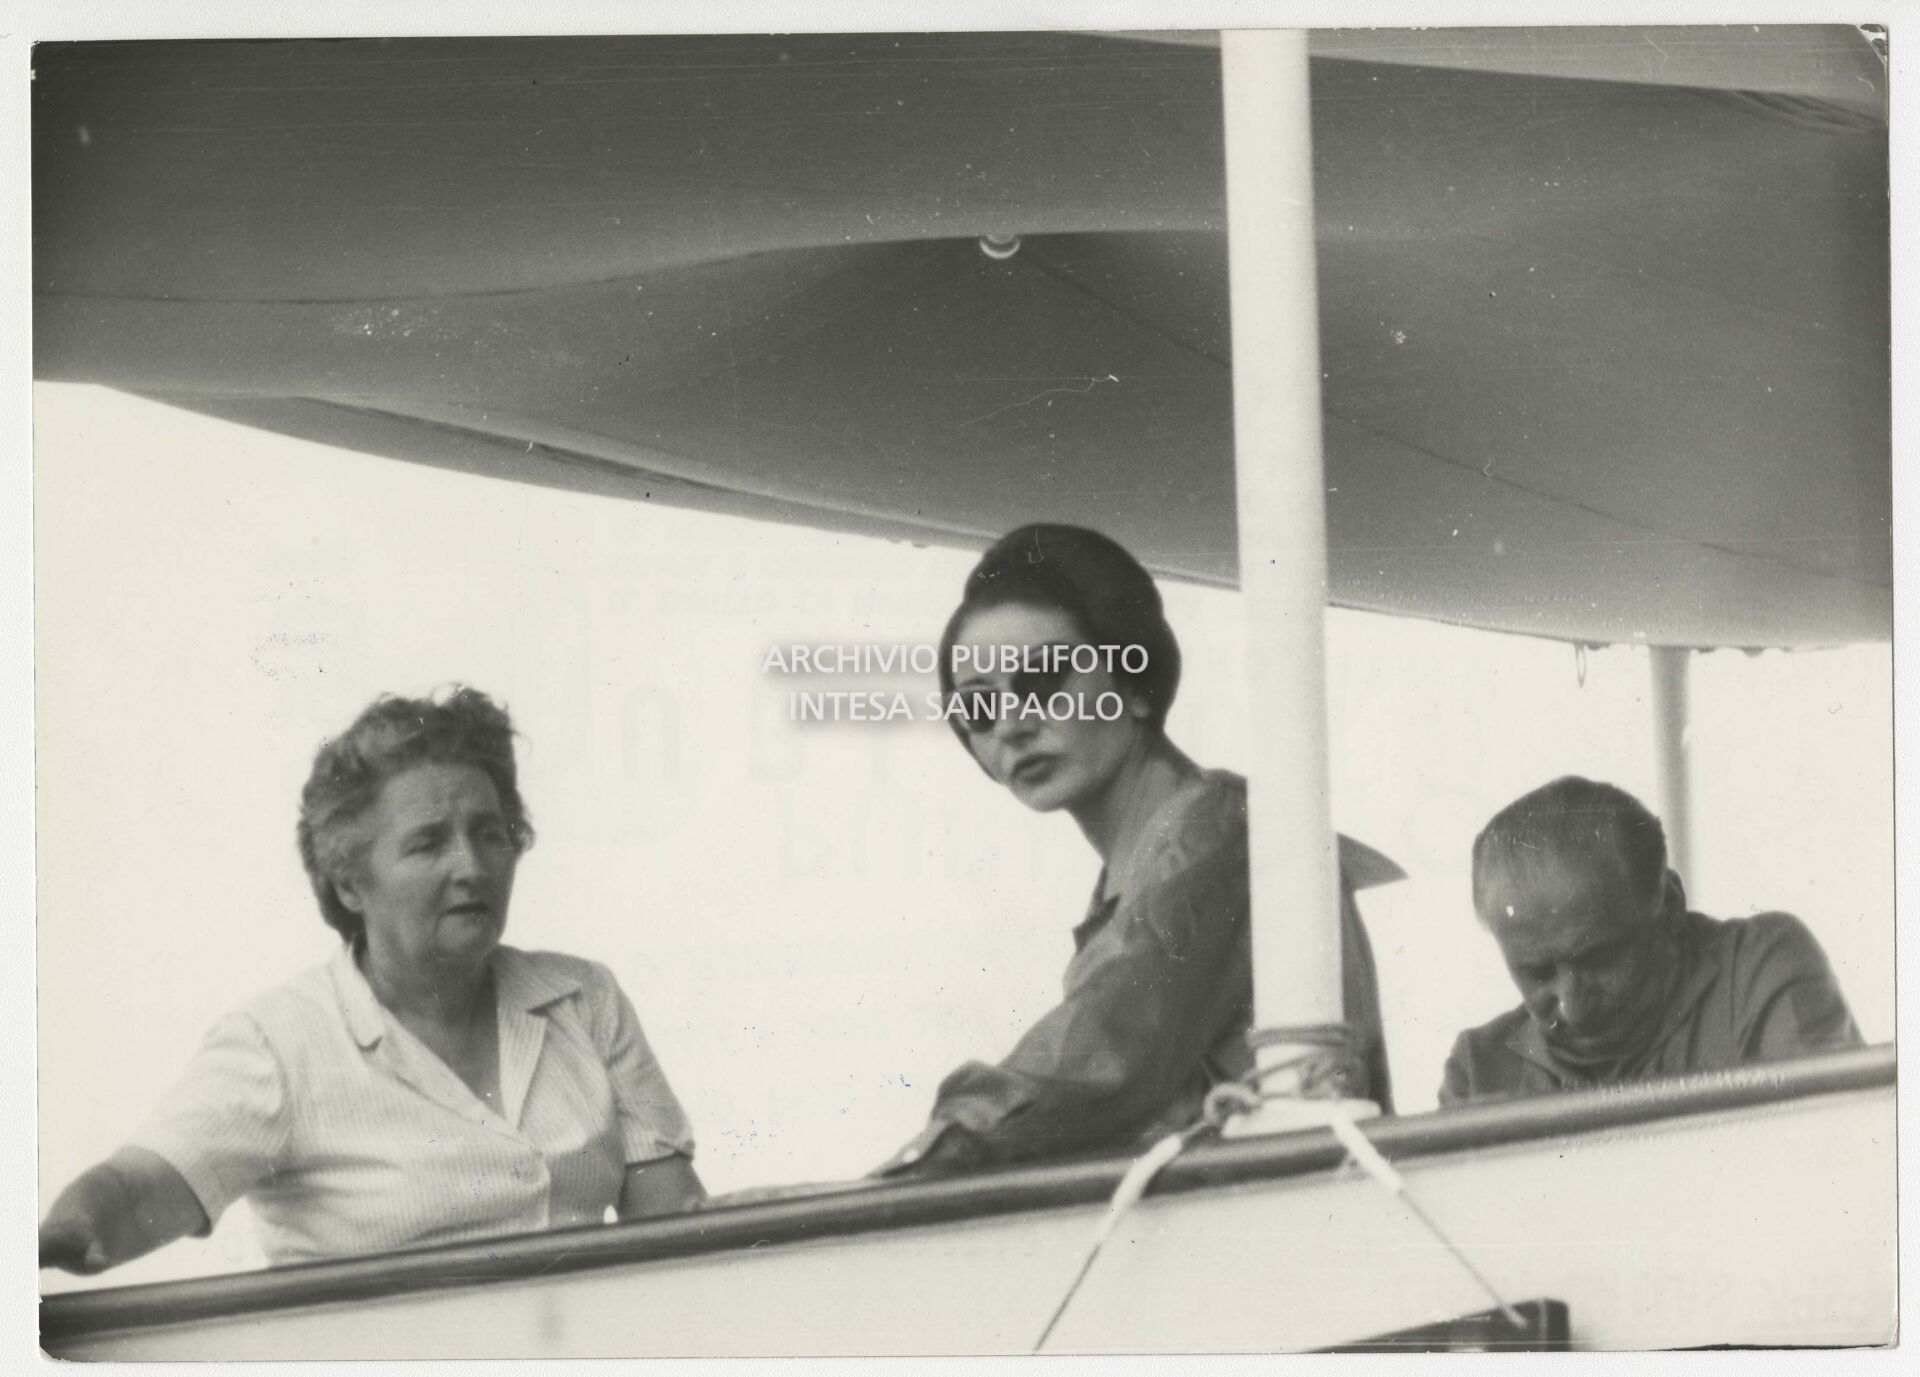 Maria Callas and her husband Giovanni Battista Meneghini on the yacht "Christina" owned by shipowner Aristotle Onassis in Capri